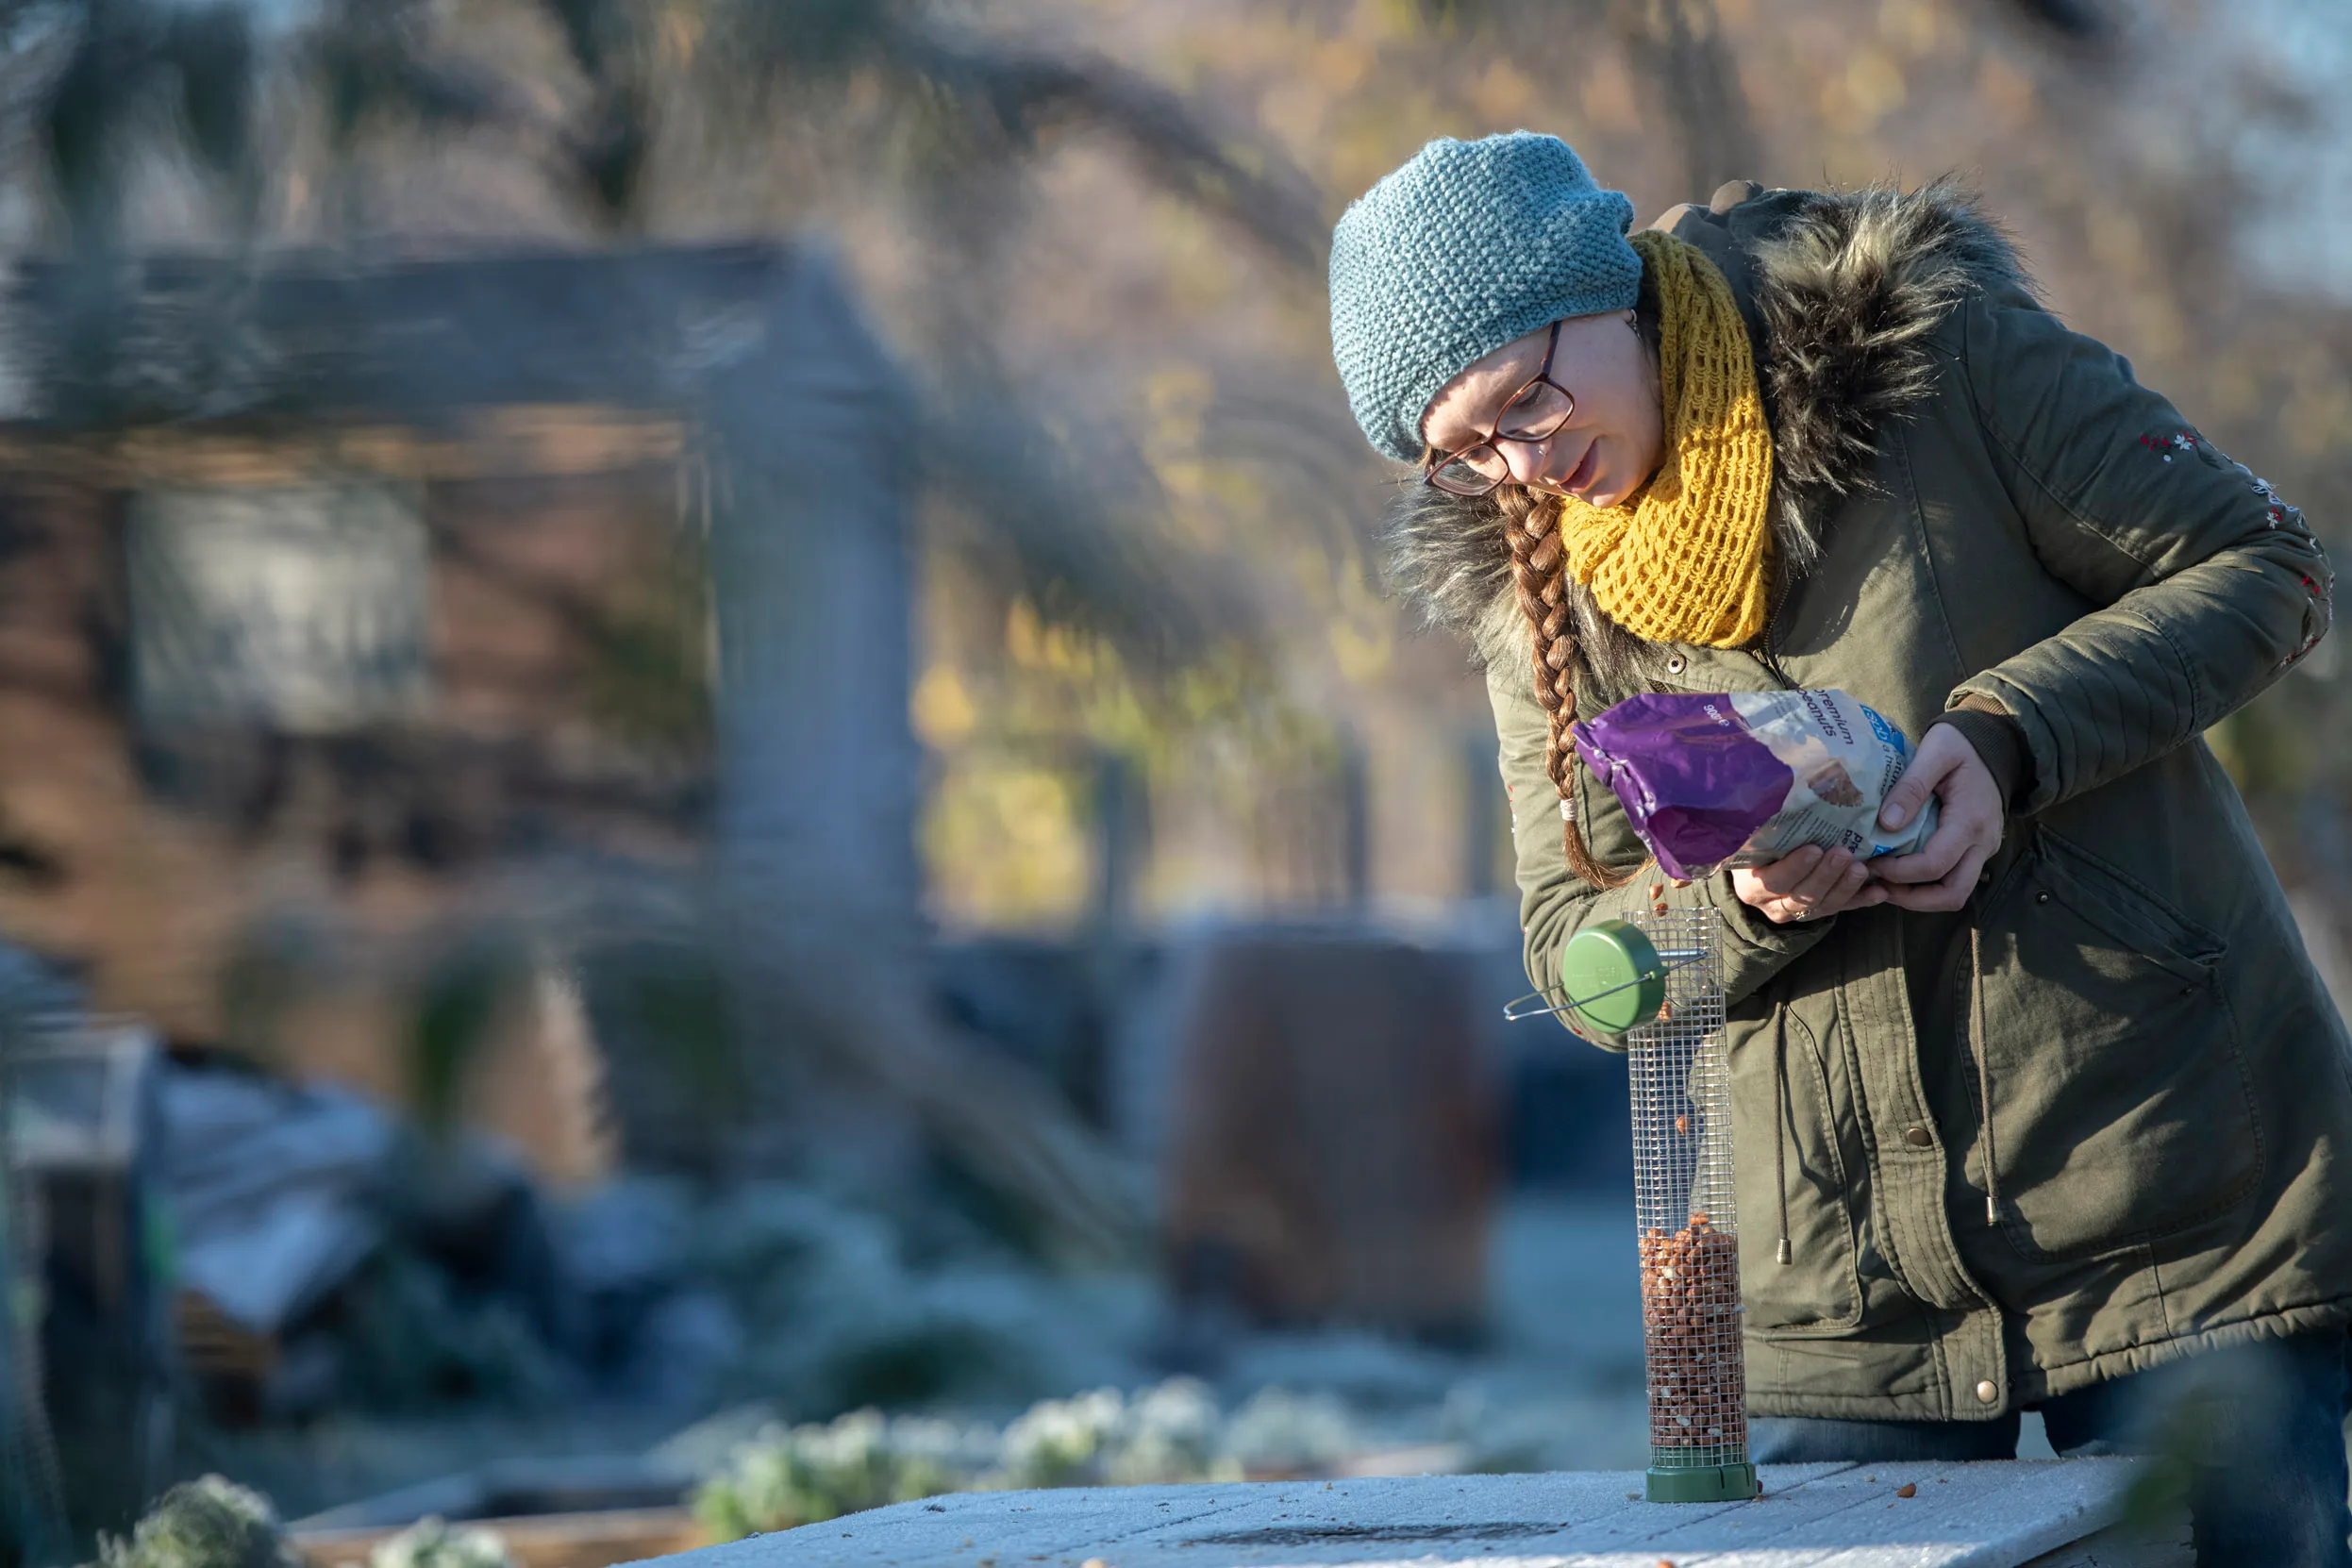 A person wearing a hat, coat and scarf filling a bird feeder on a table outside during winter.